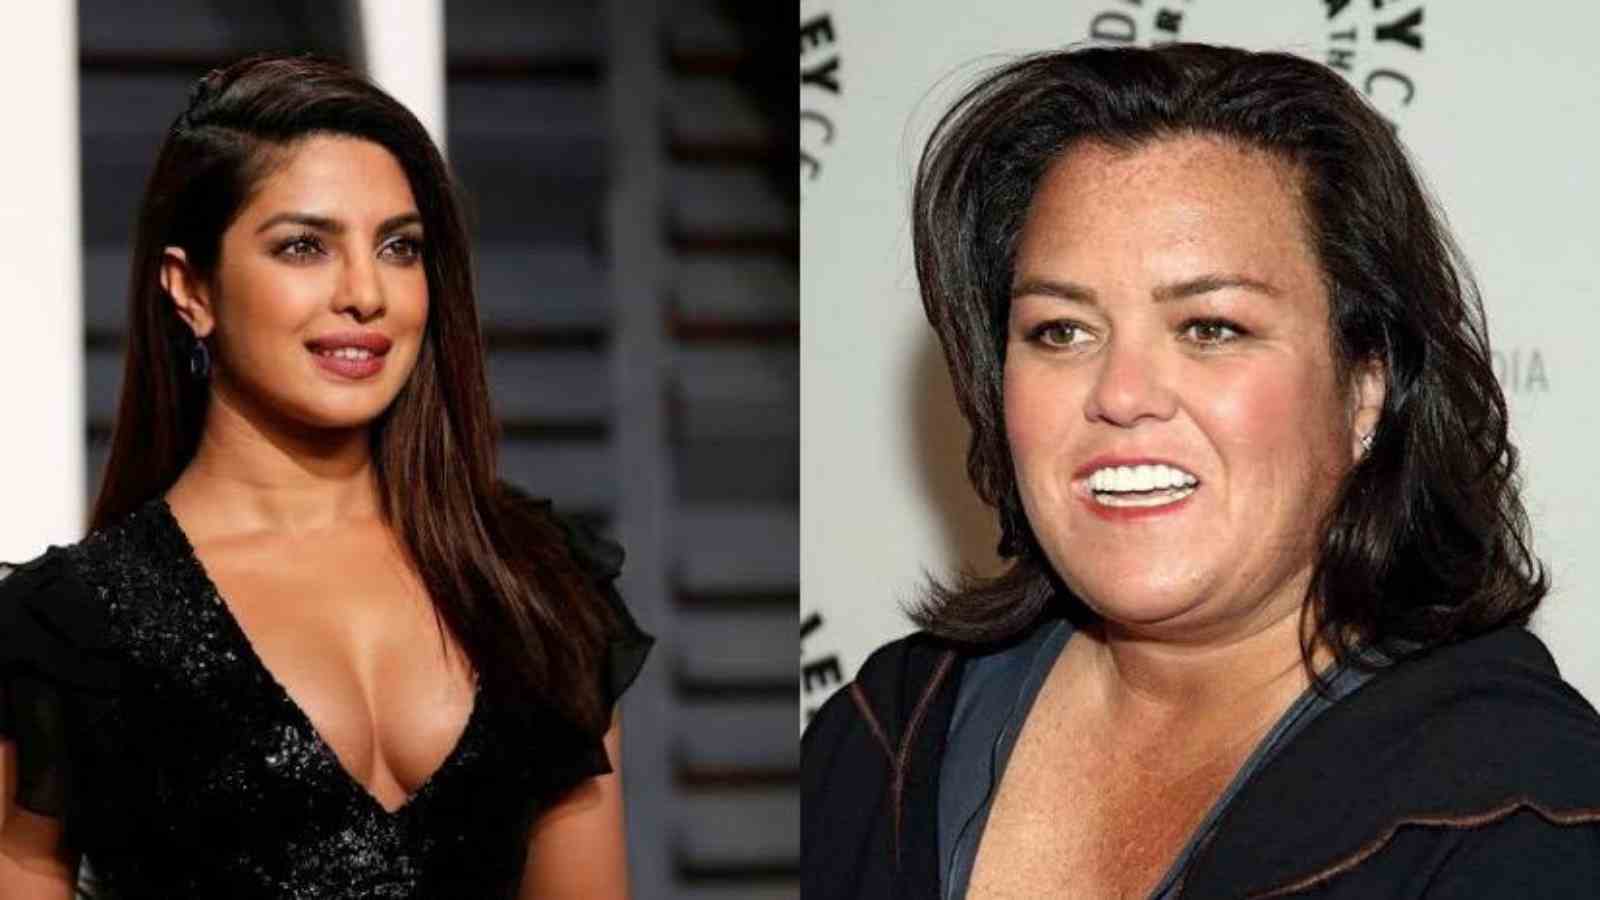 Rosie O'Donnell said she embarrassed herself in front of Priyanka Chopra 